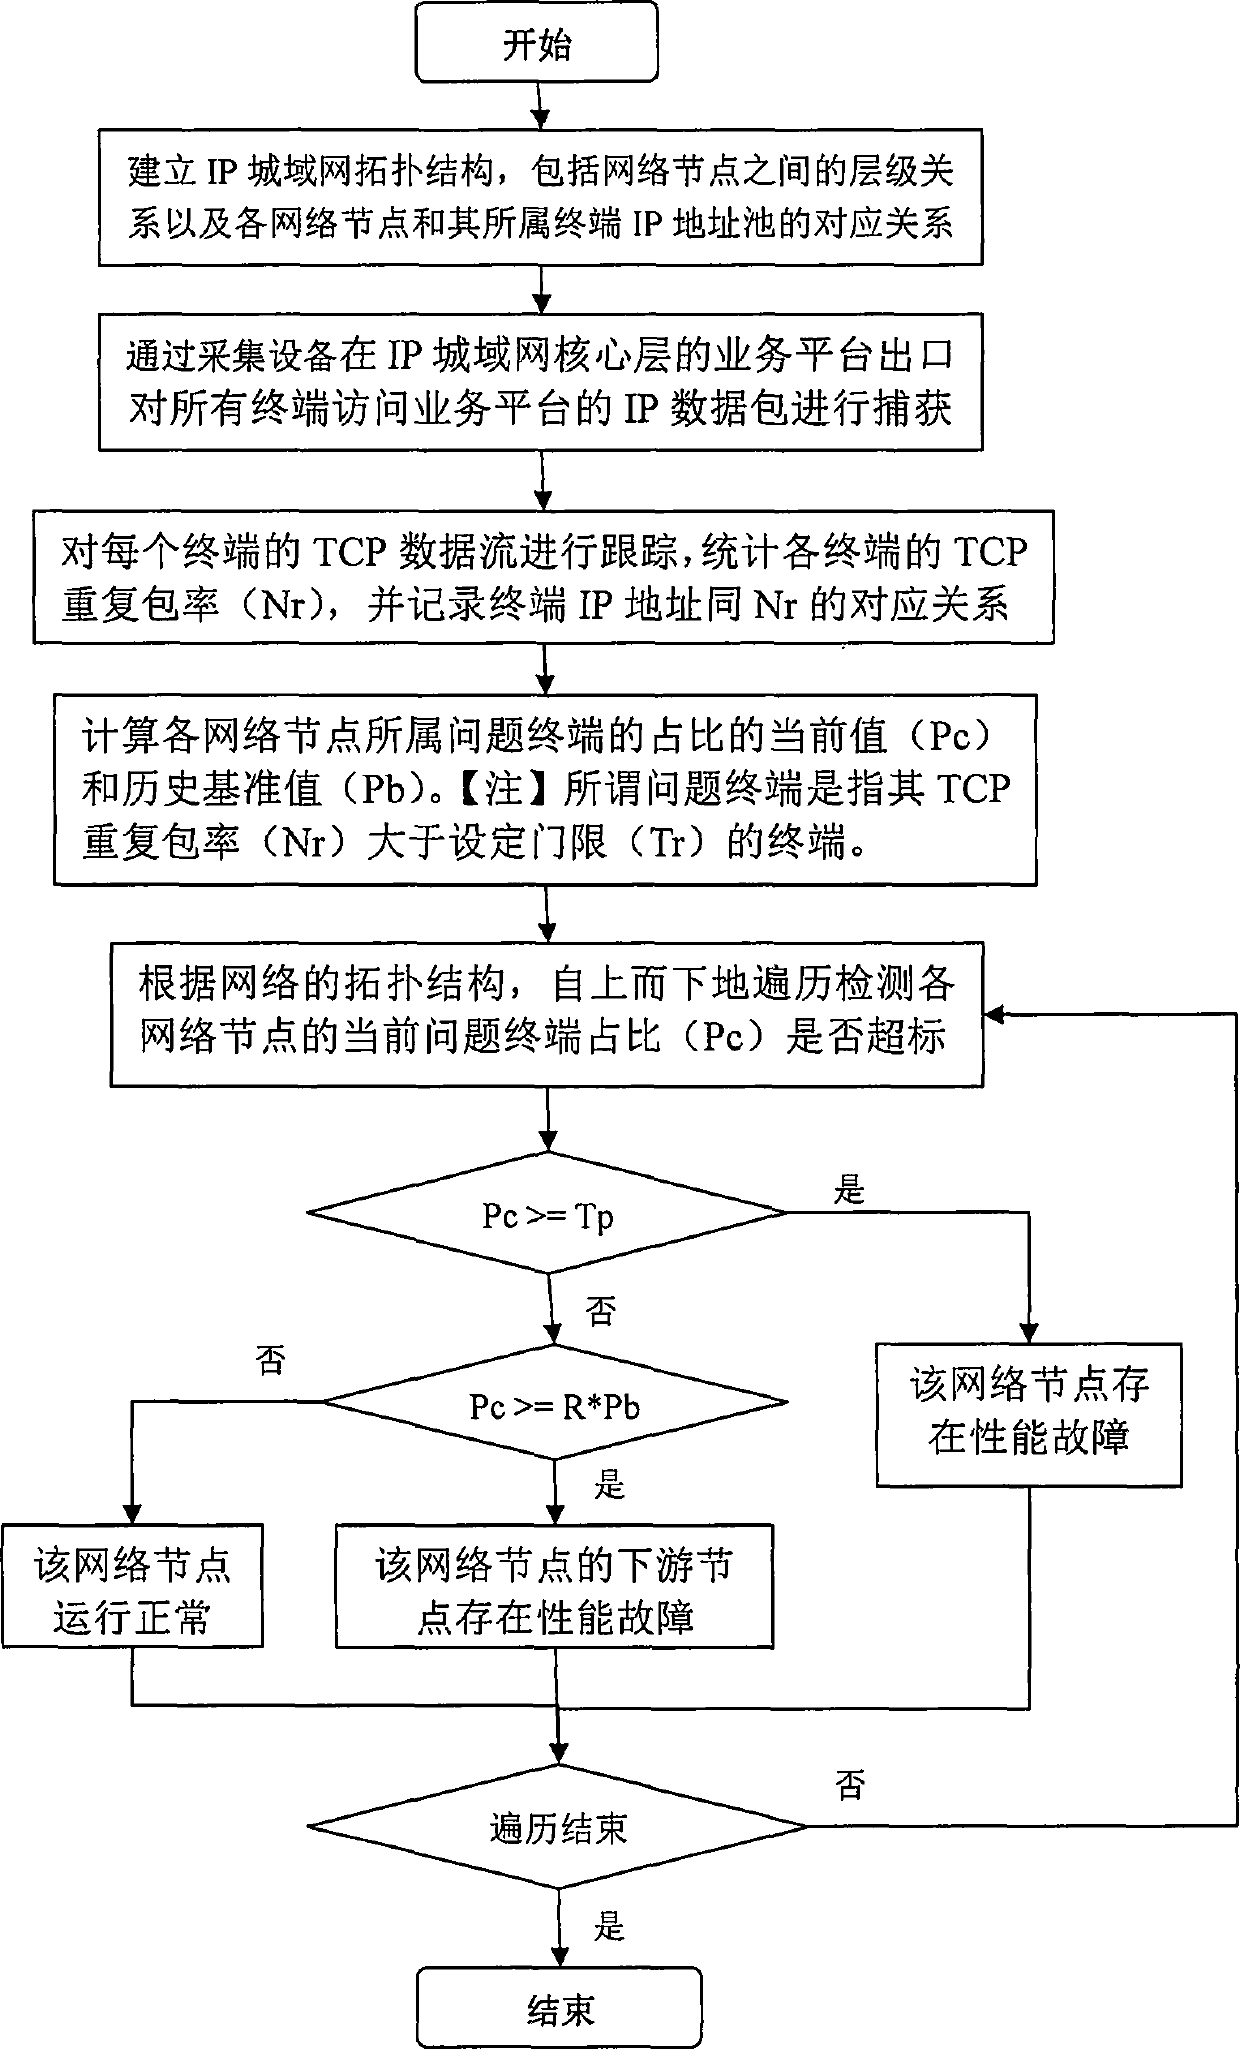 Method for detecting network performance problems and positioning failure nodes